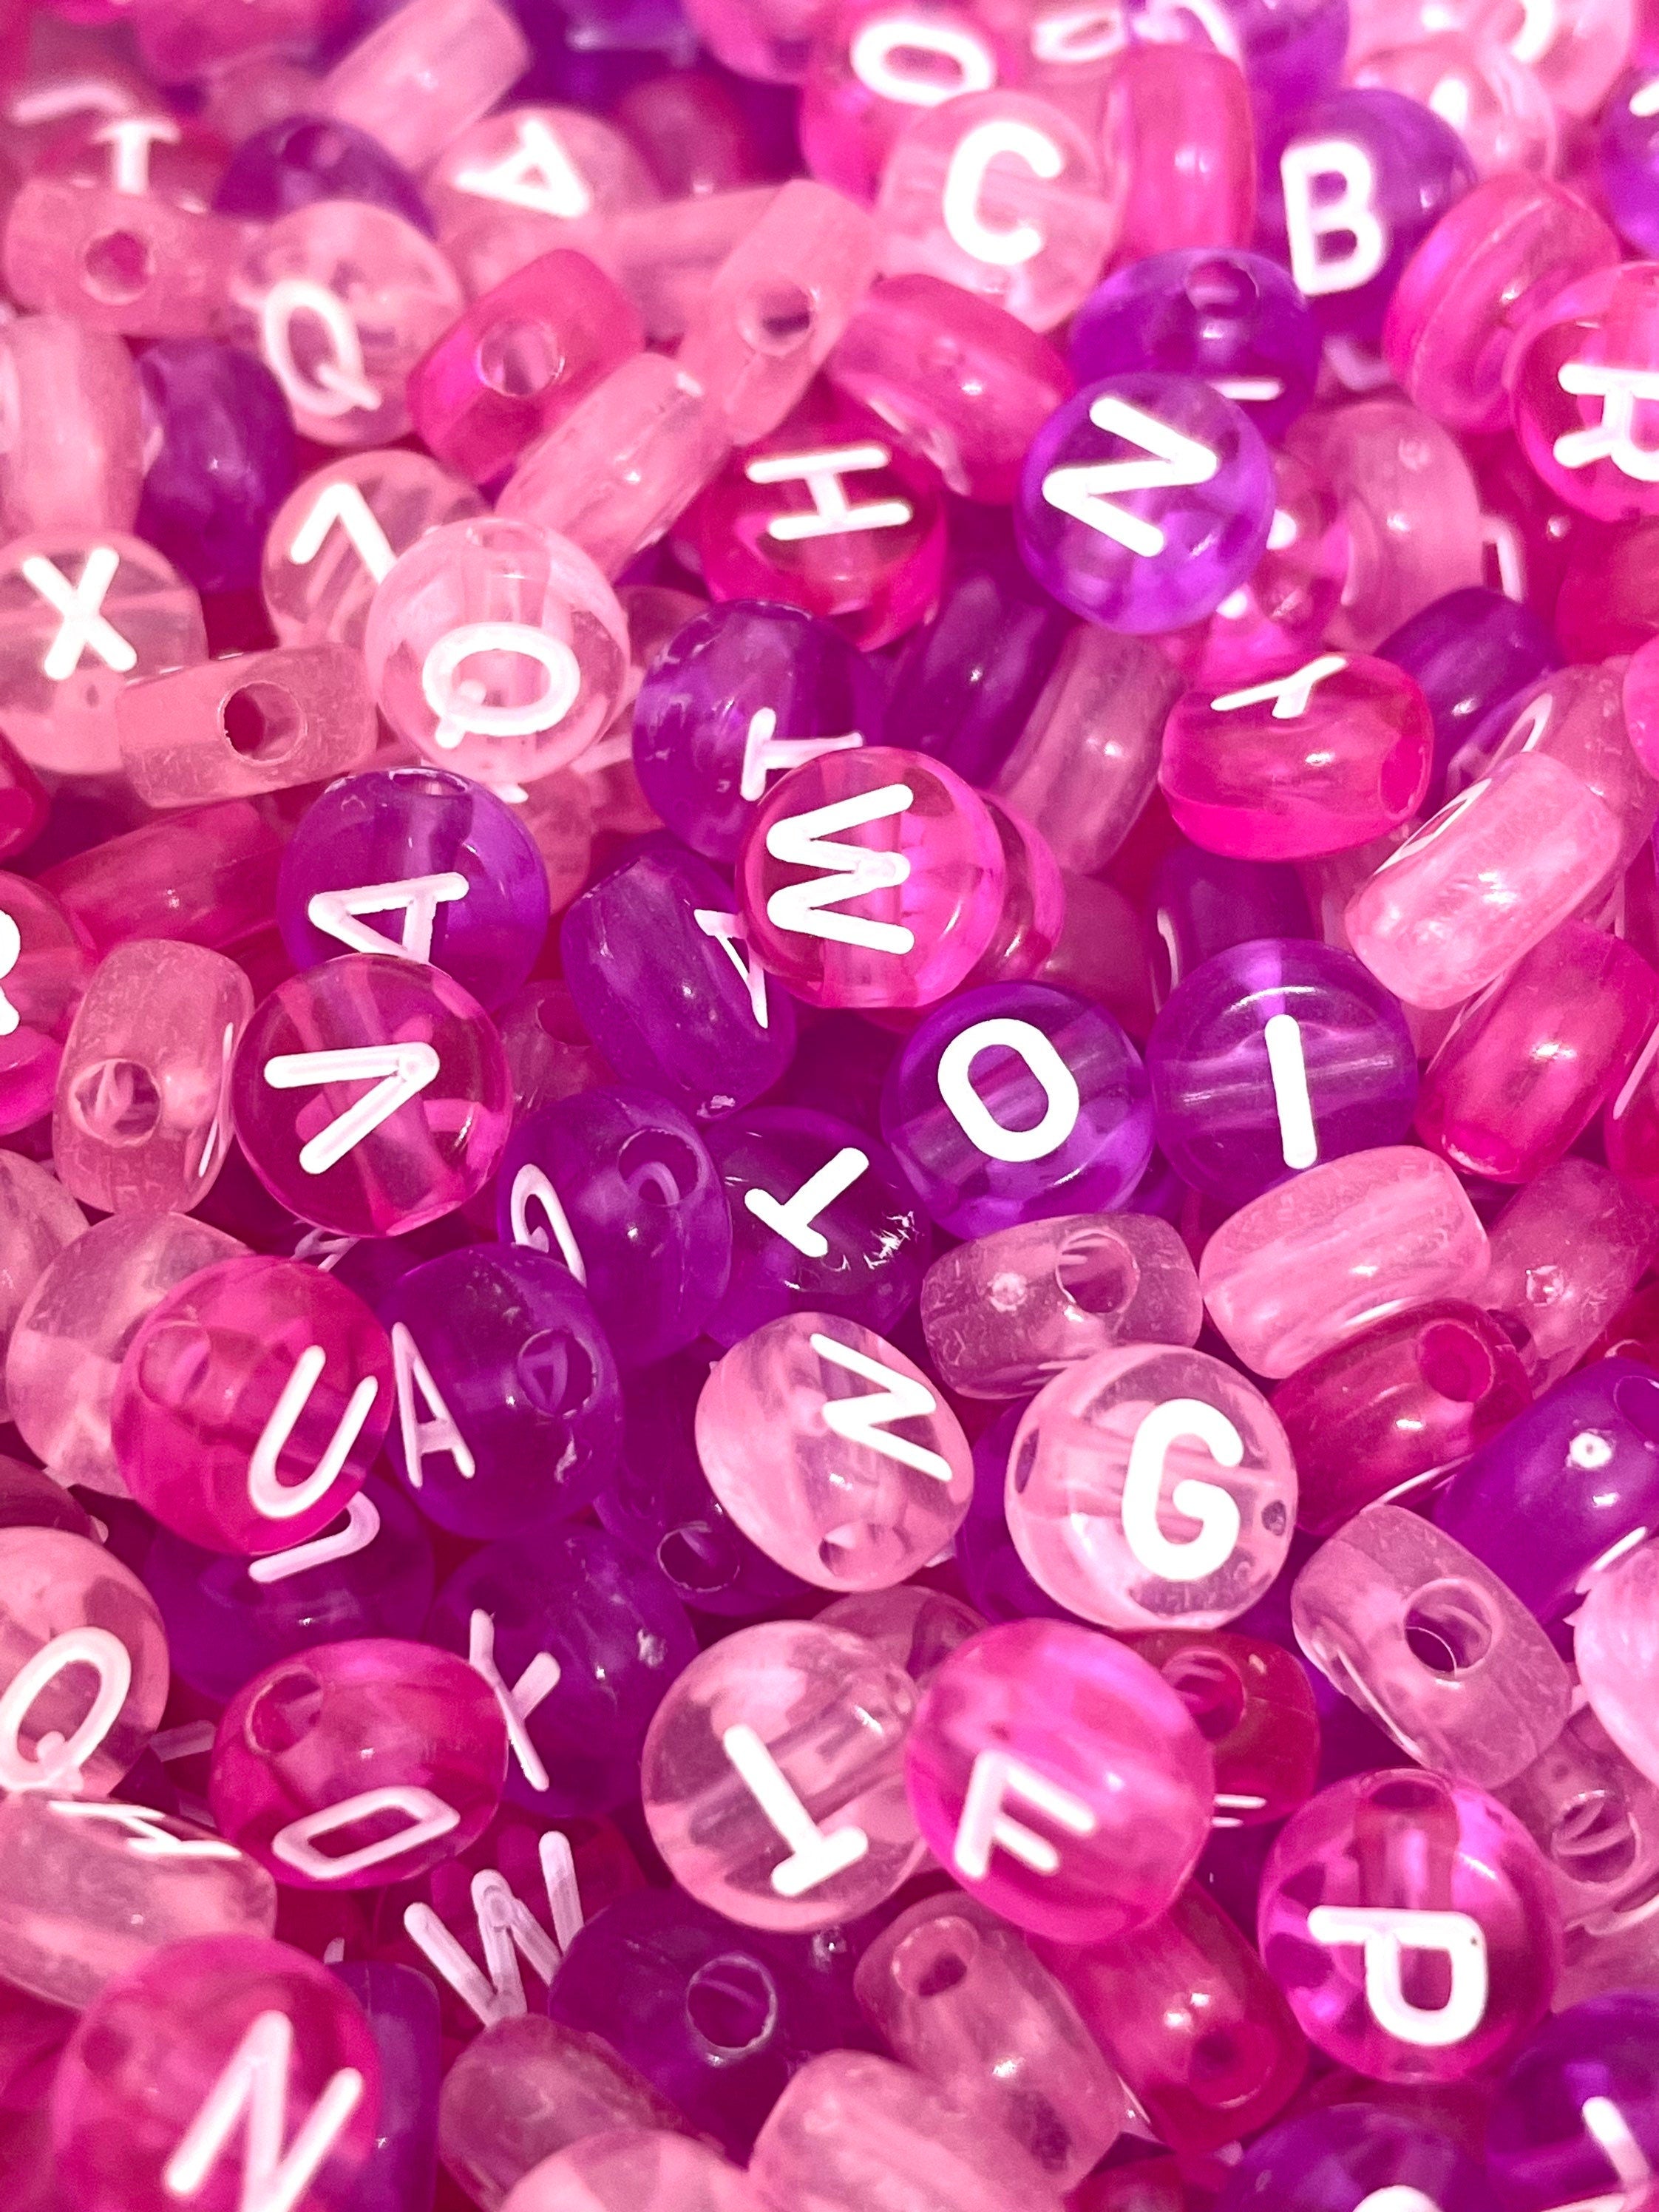 Cute Purple and Pink Letter Bead Mix, Pink Alphabet Beads for